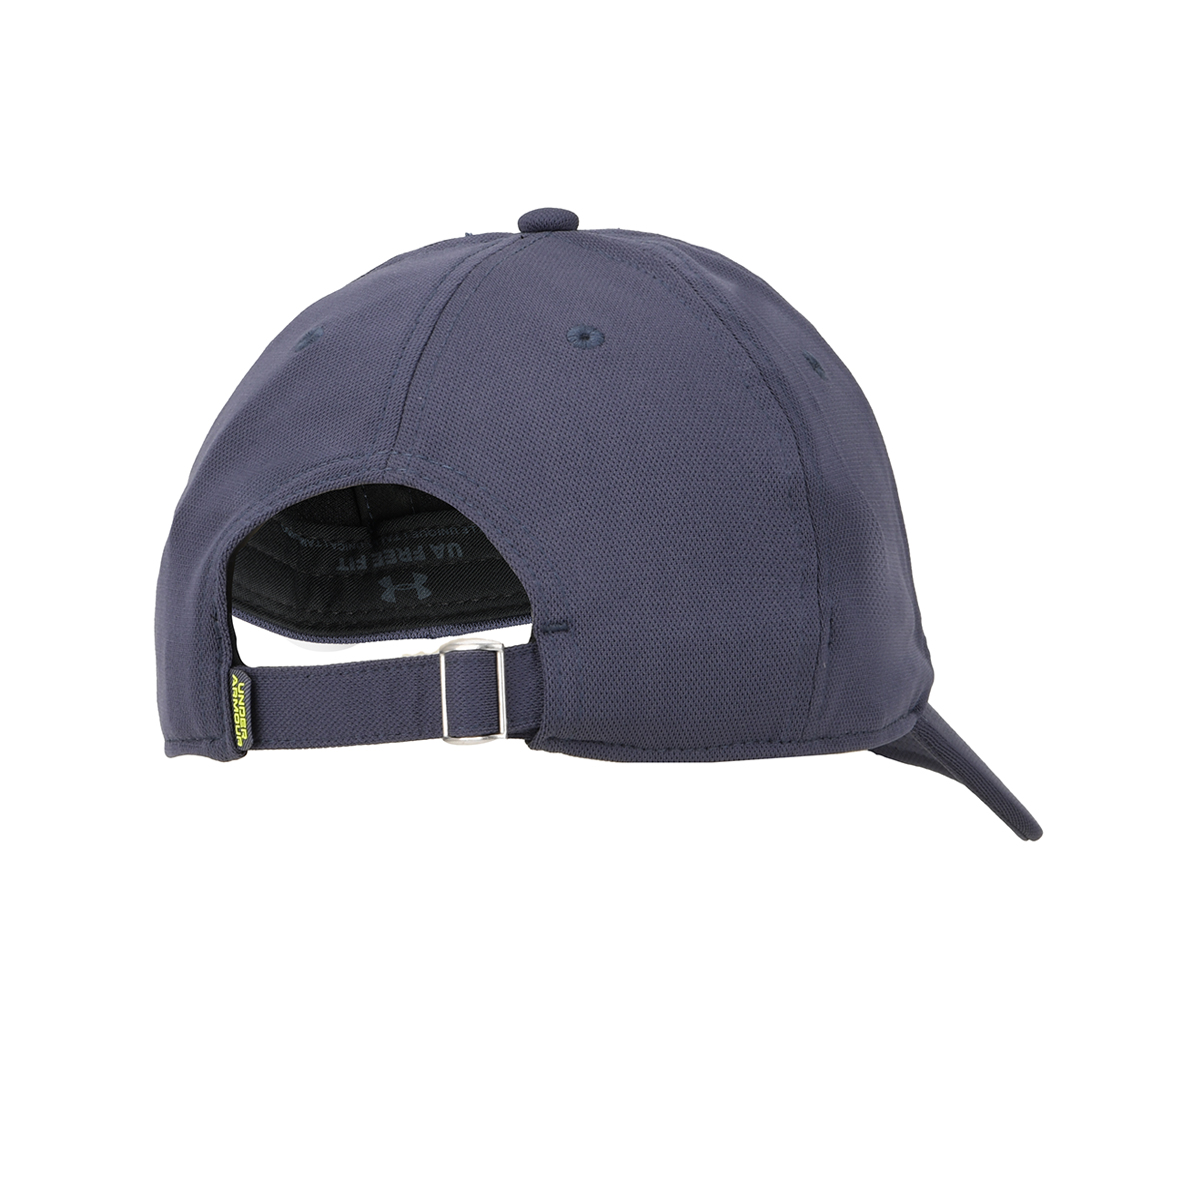 Gorra Under Armour Blitzing Adjt,  image number null